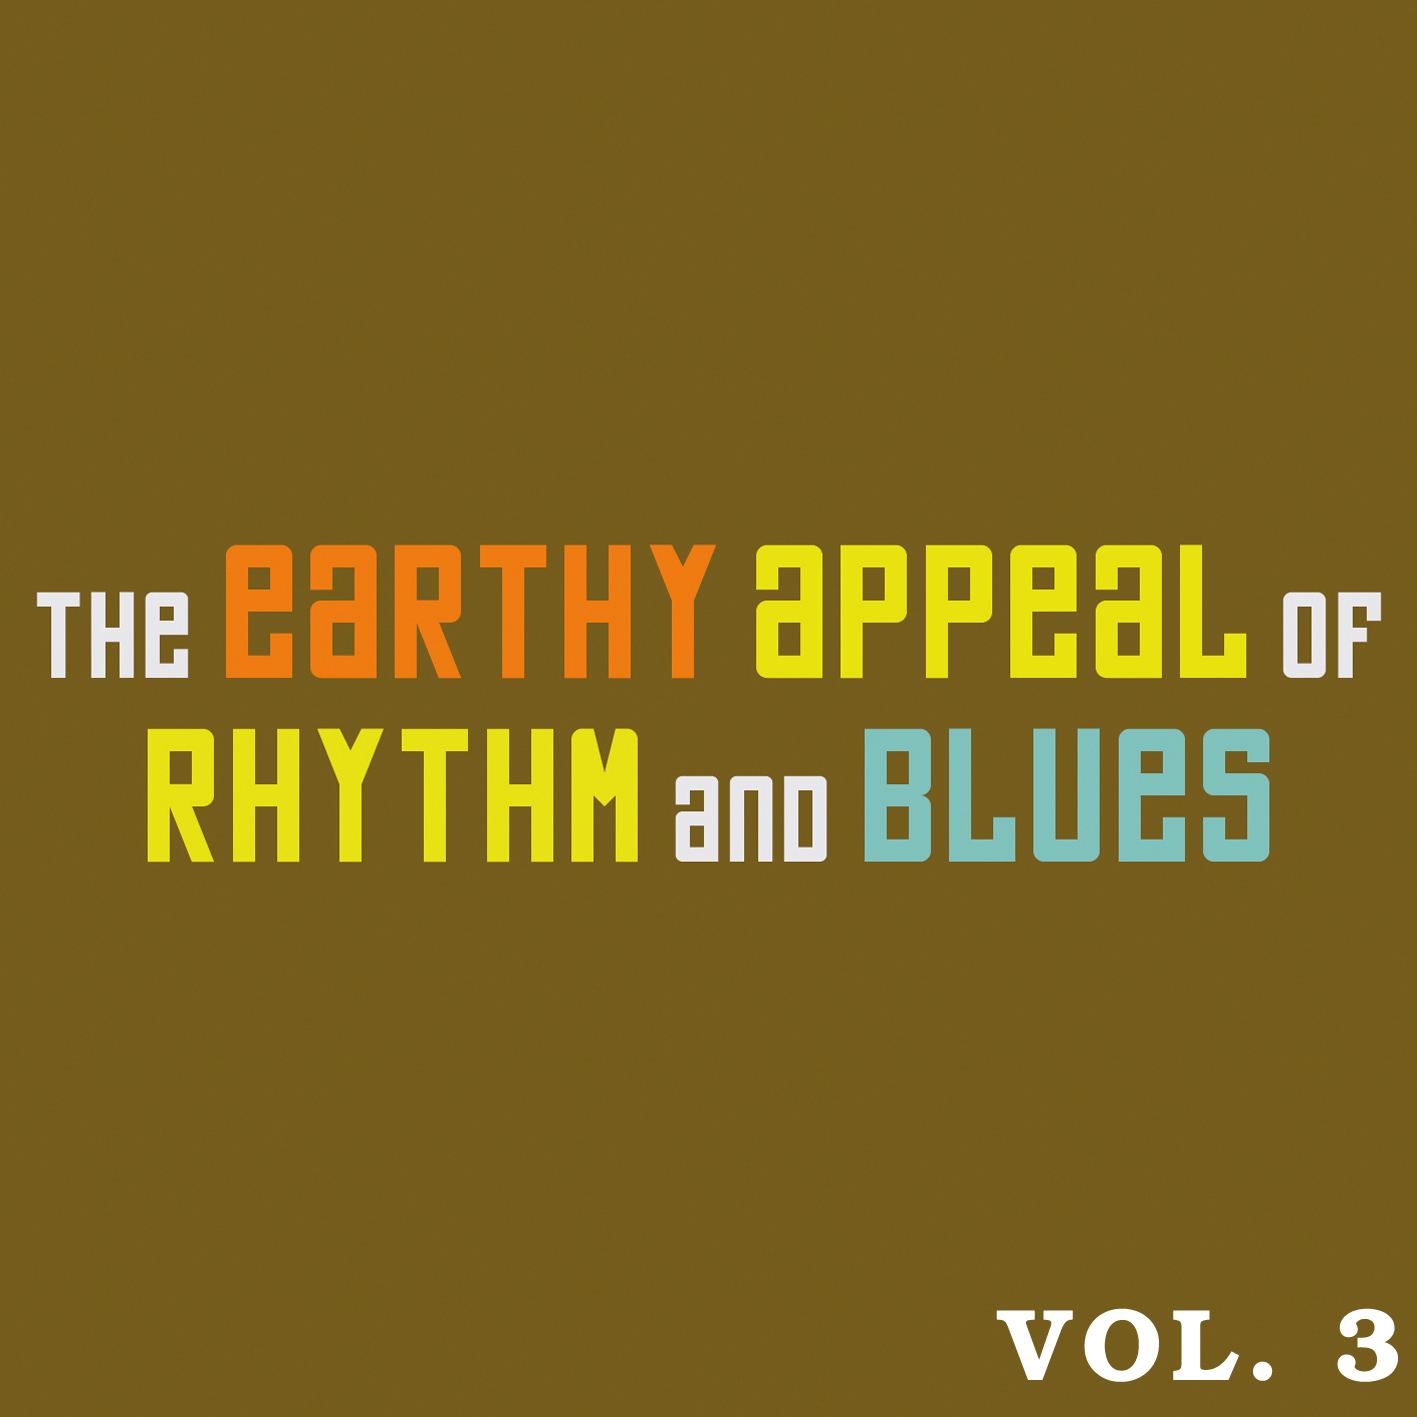 The Earthy Appeal of Rhythm and Blues Vol.3